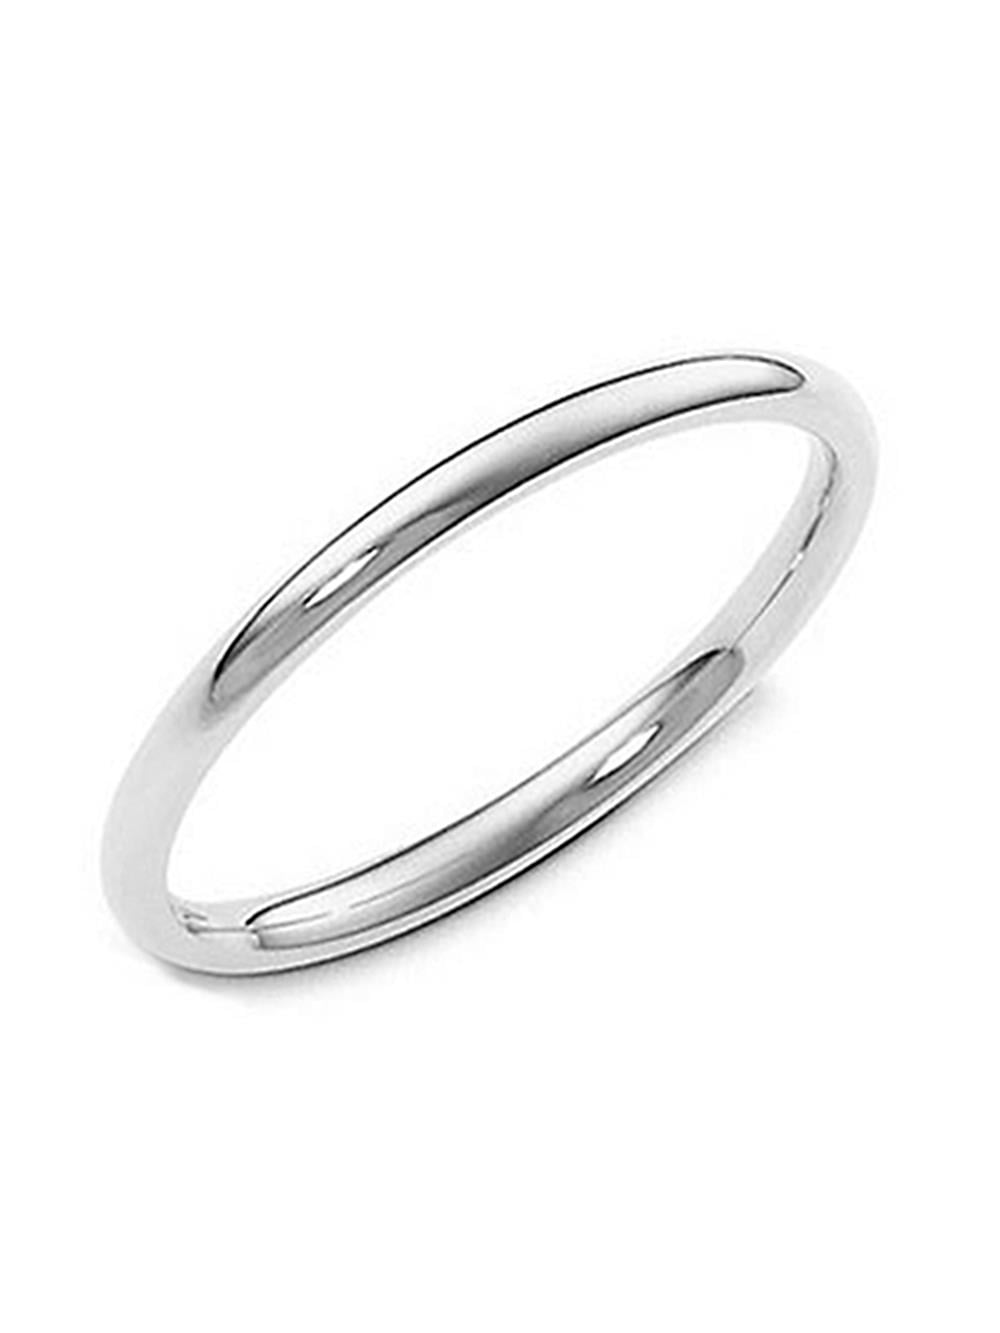 7 12 10 9 MIMI 6MM Sterling Silver Plain Flat Wedding Band Ring Size 5 6 11 8 